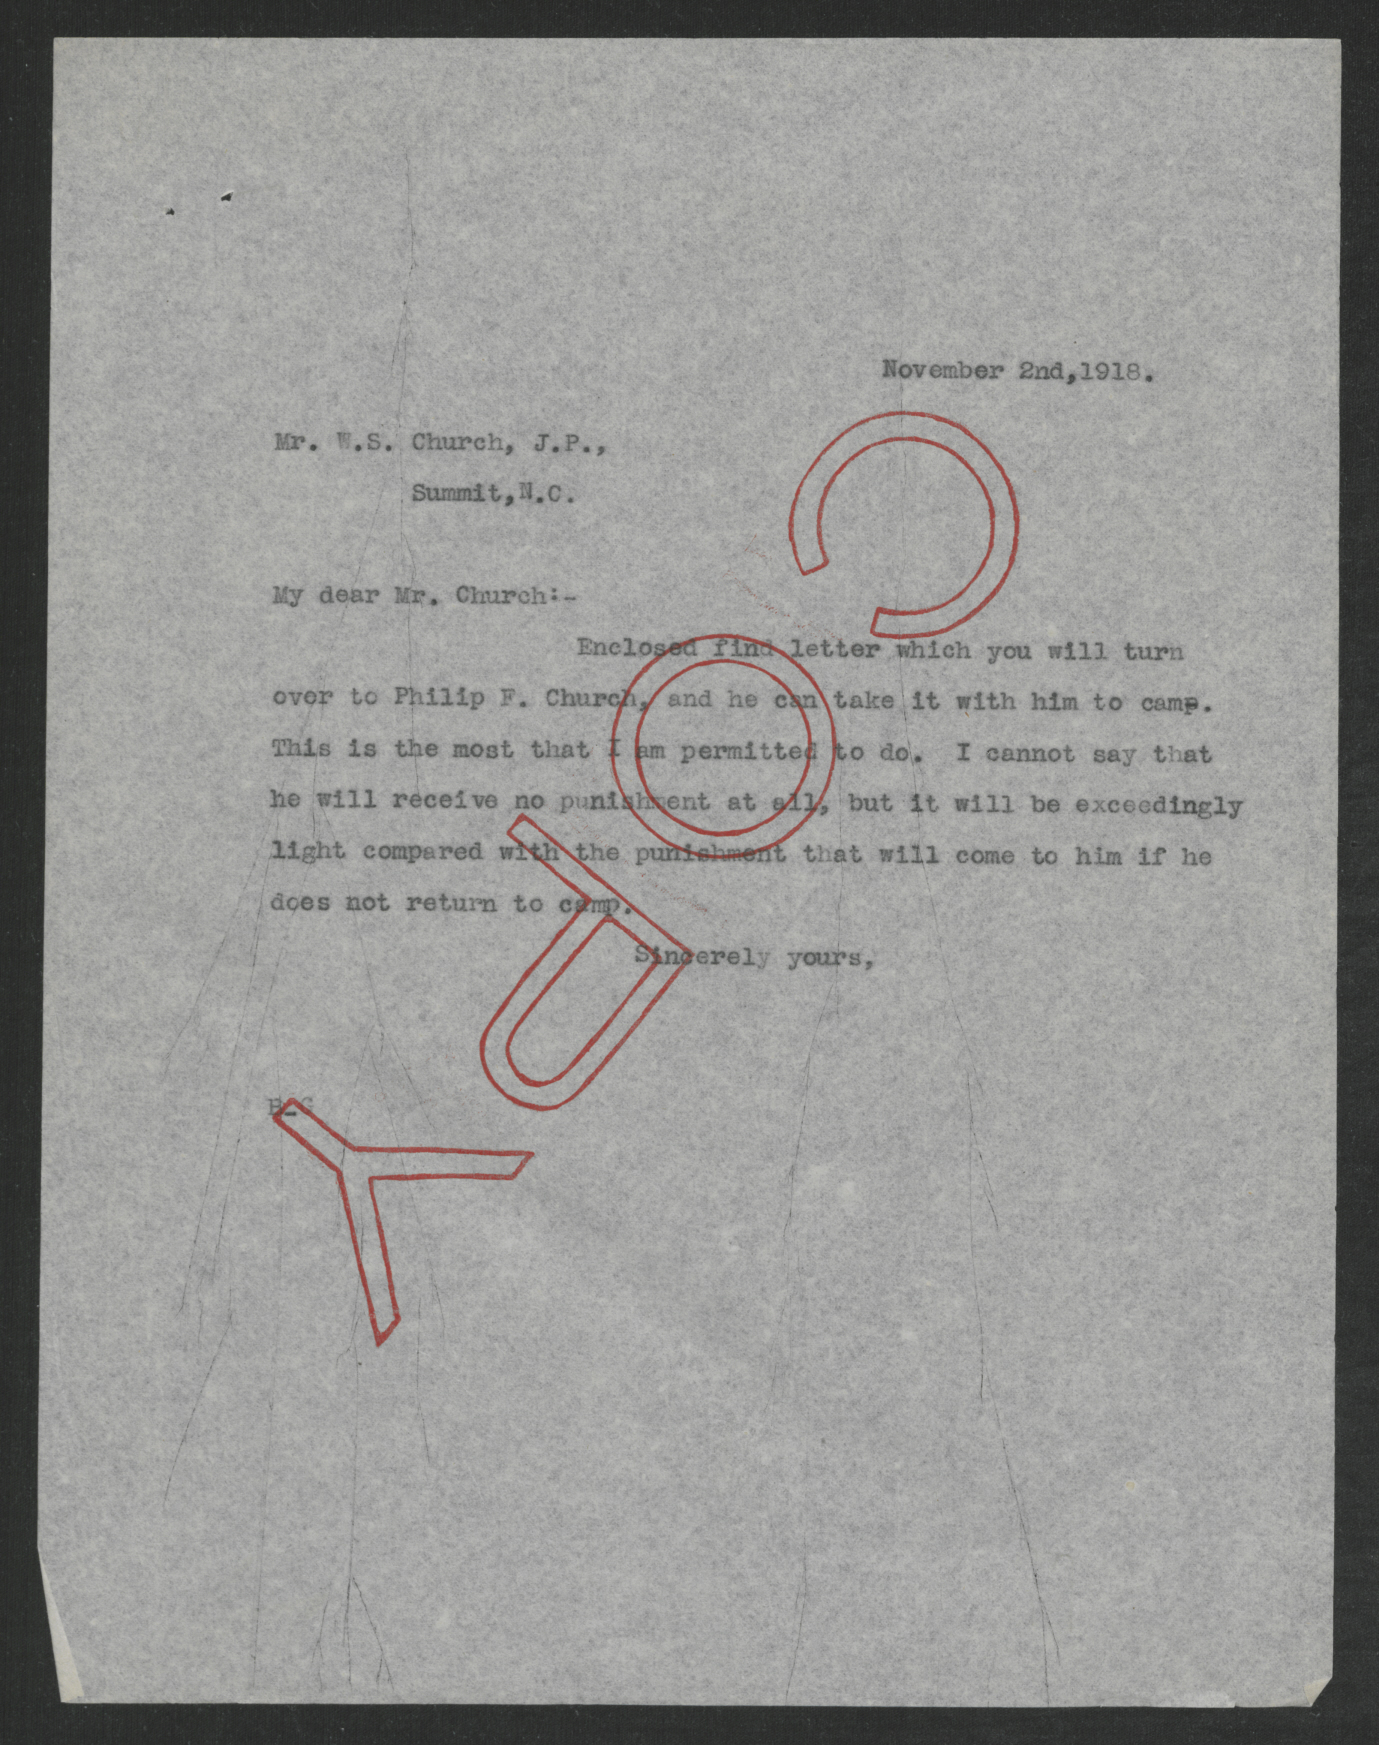 Letter from Thomas W. Bickett to Winfield S. Church, November 2, 1918